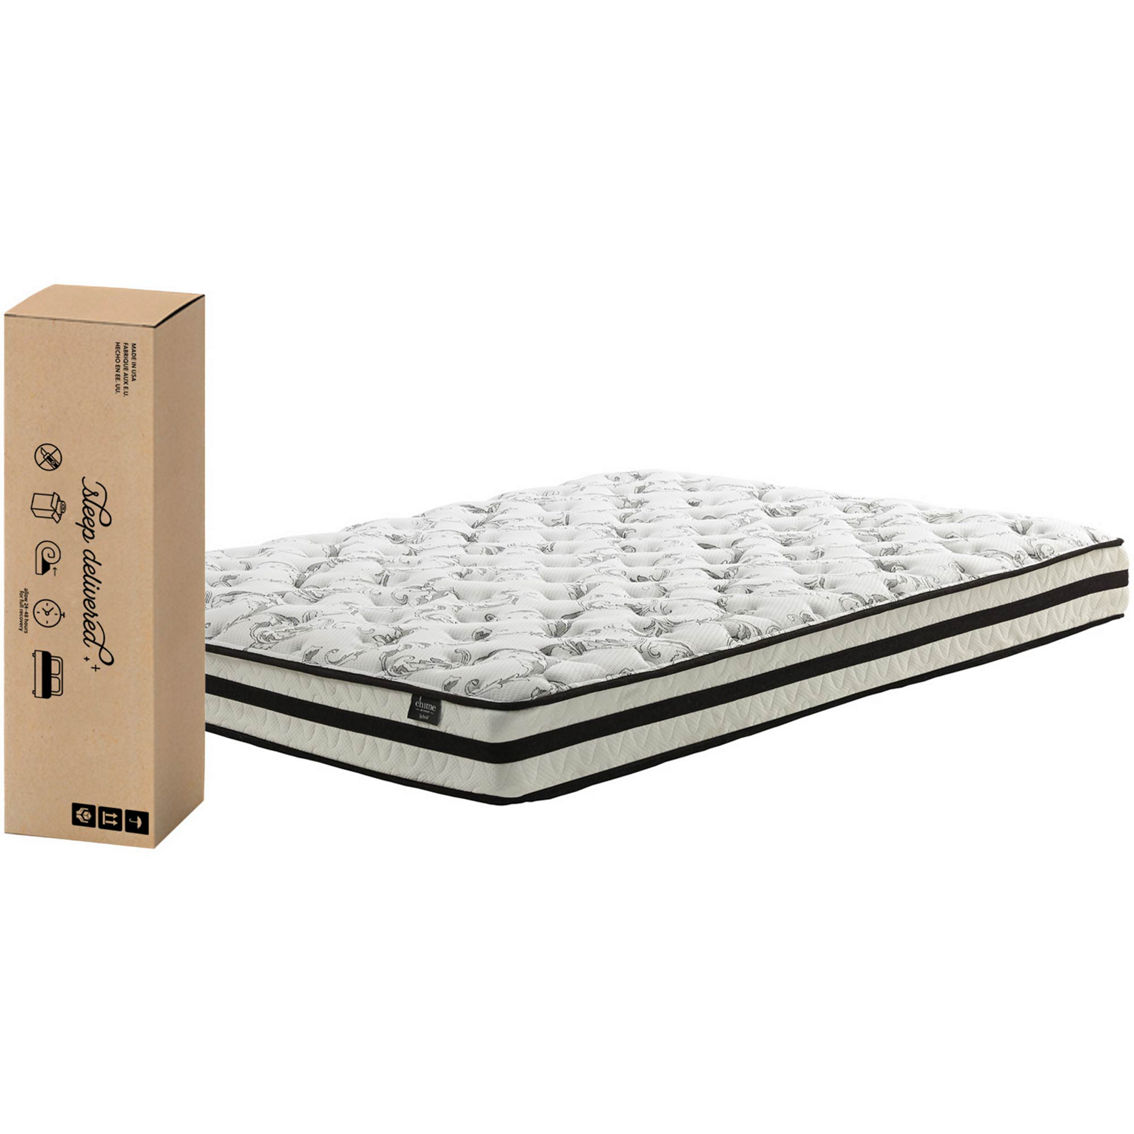 Sierra Sleep by Ashley Chime 8 in. Firm Mattress - Image 2 of 2